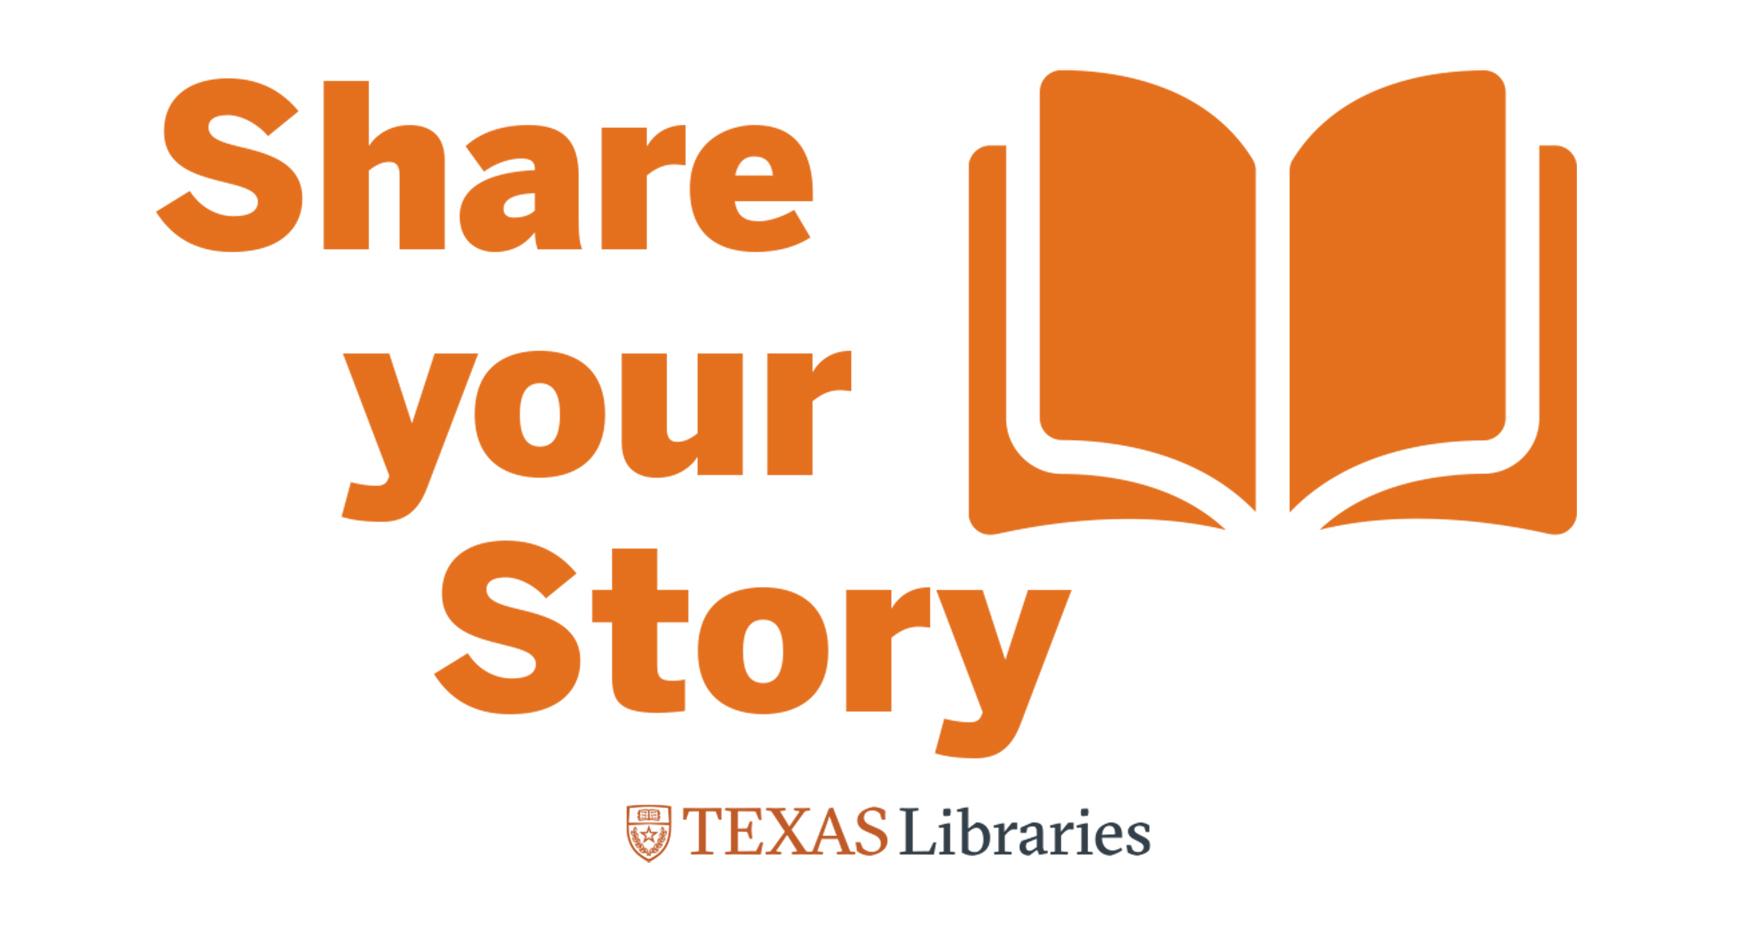 logo for stories campaign, "Share Your Story" with book graphic and Texas Libraries logo